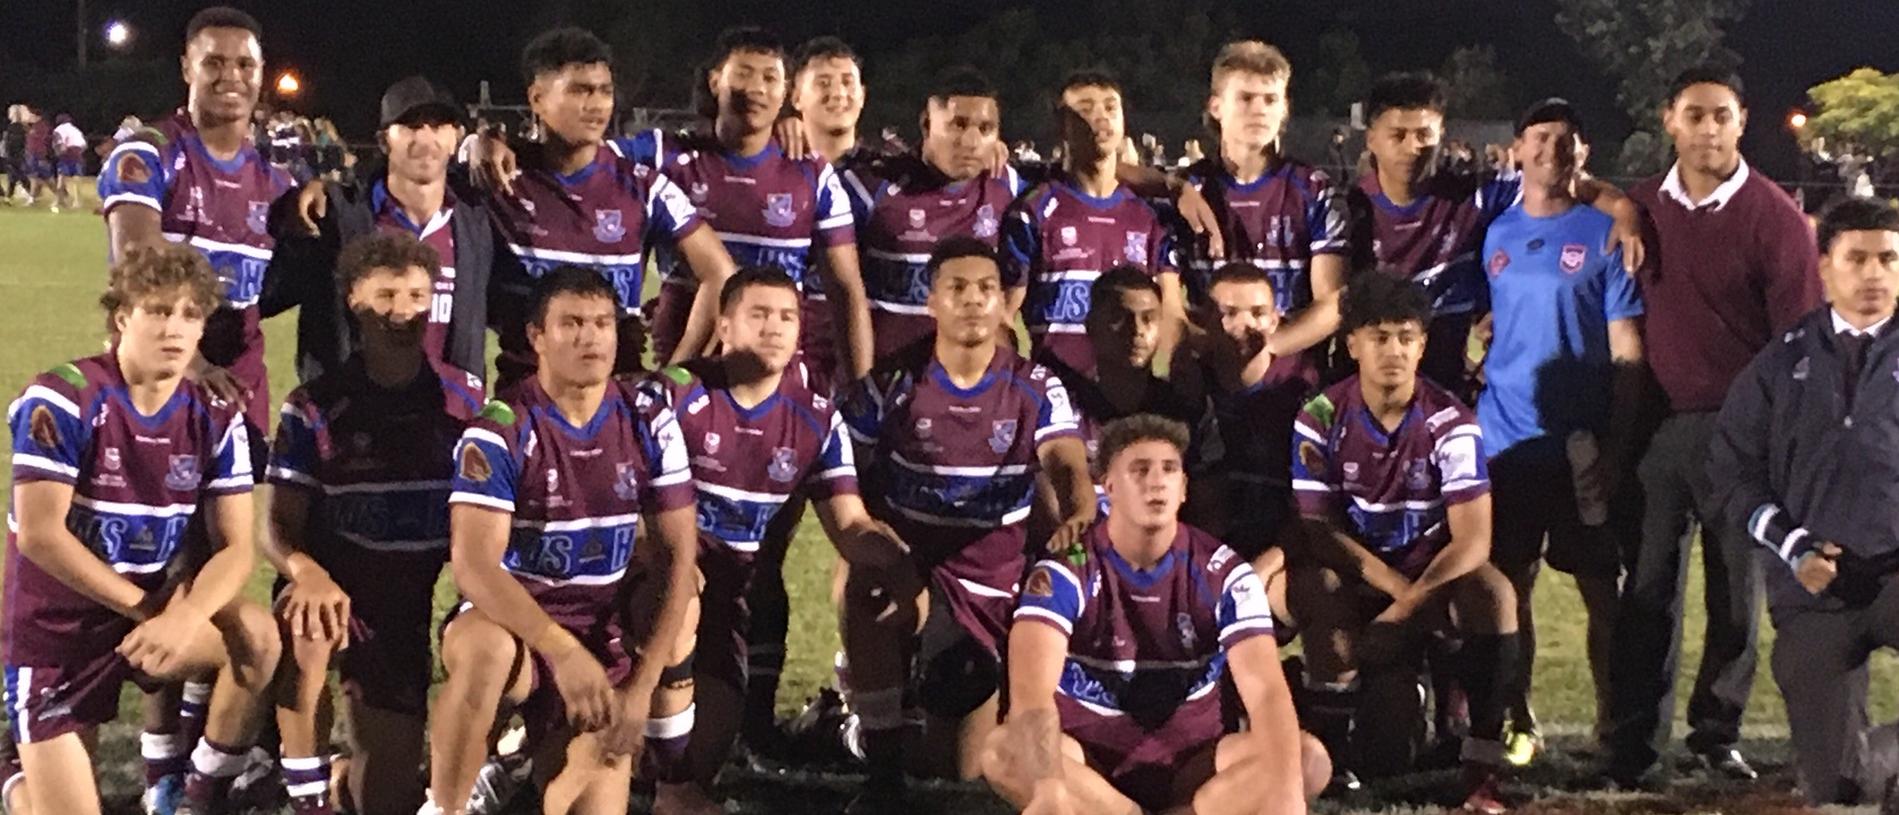 Wavell SHS after last night's win.